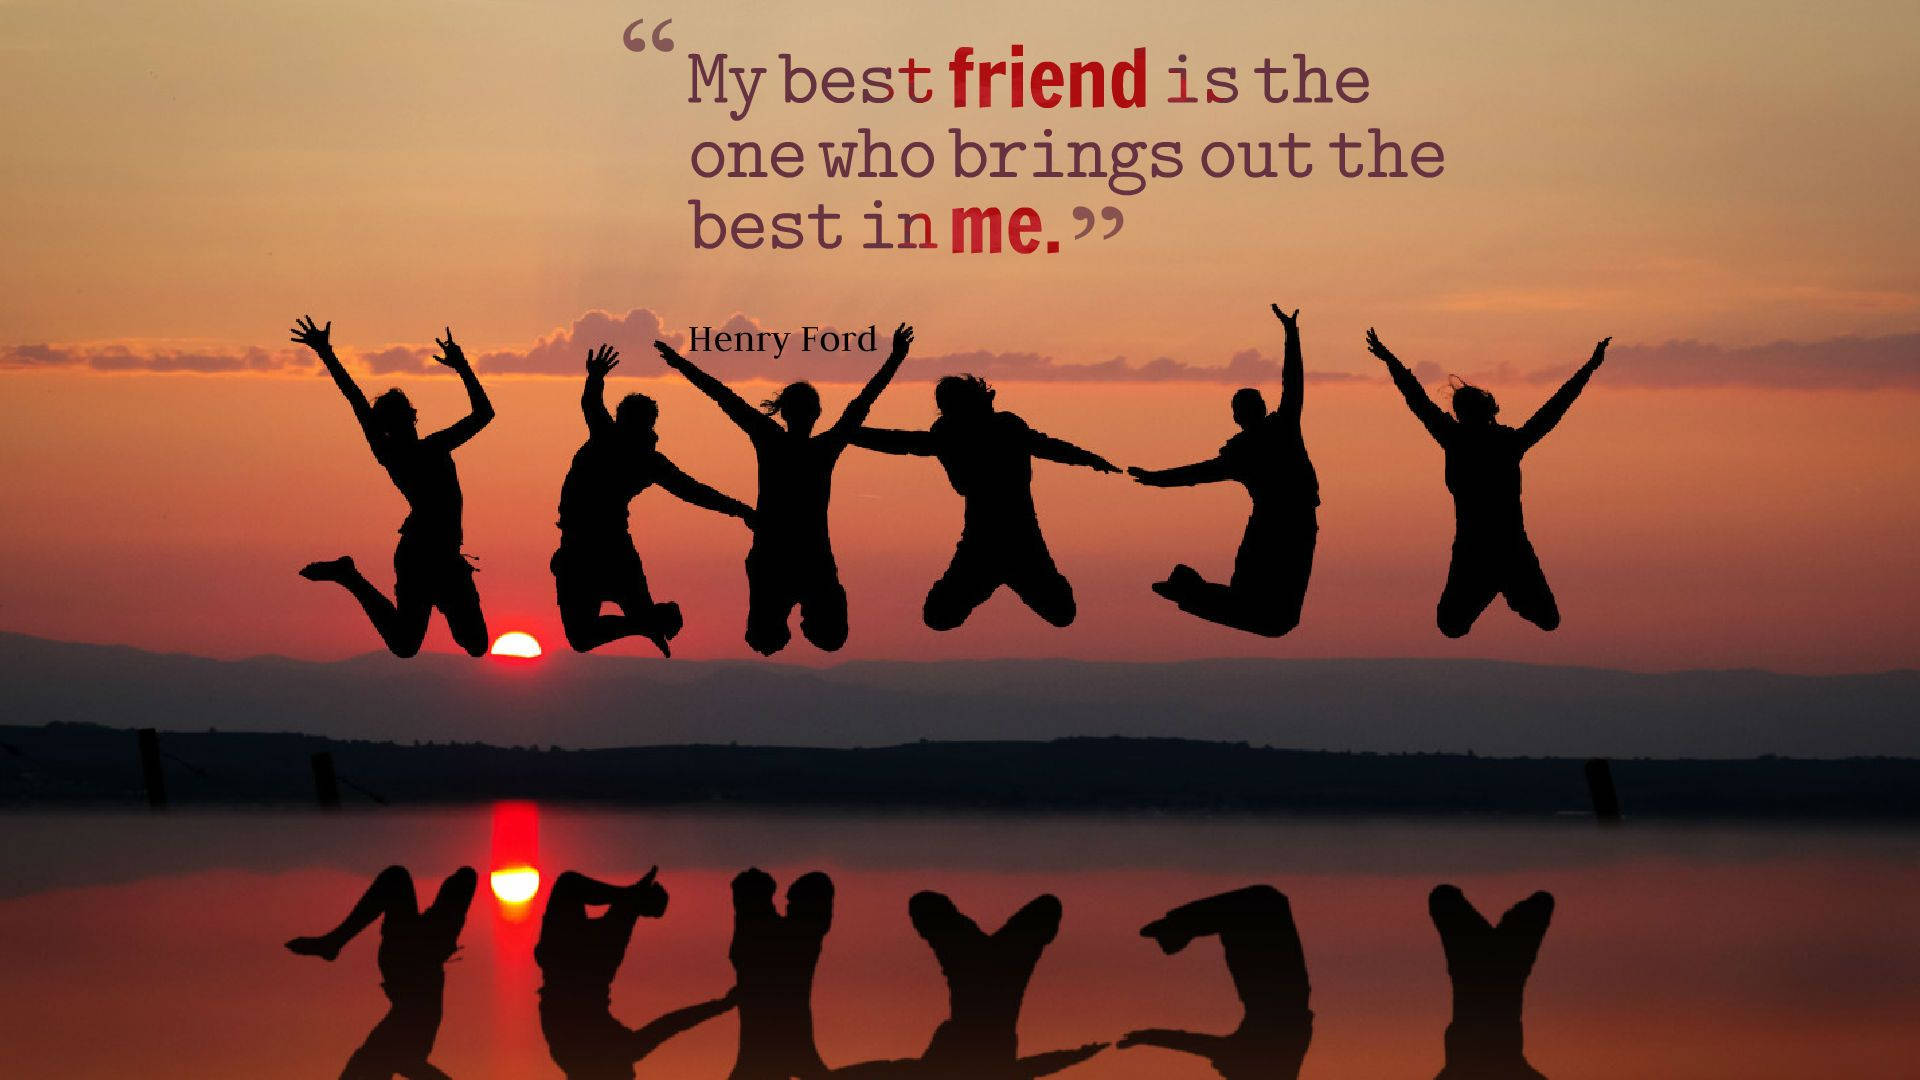 Unearth The Best In Me - Expressive Friendship Quote Background